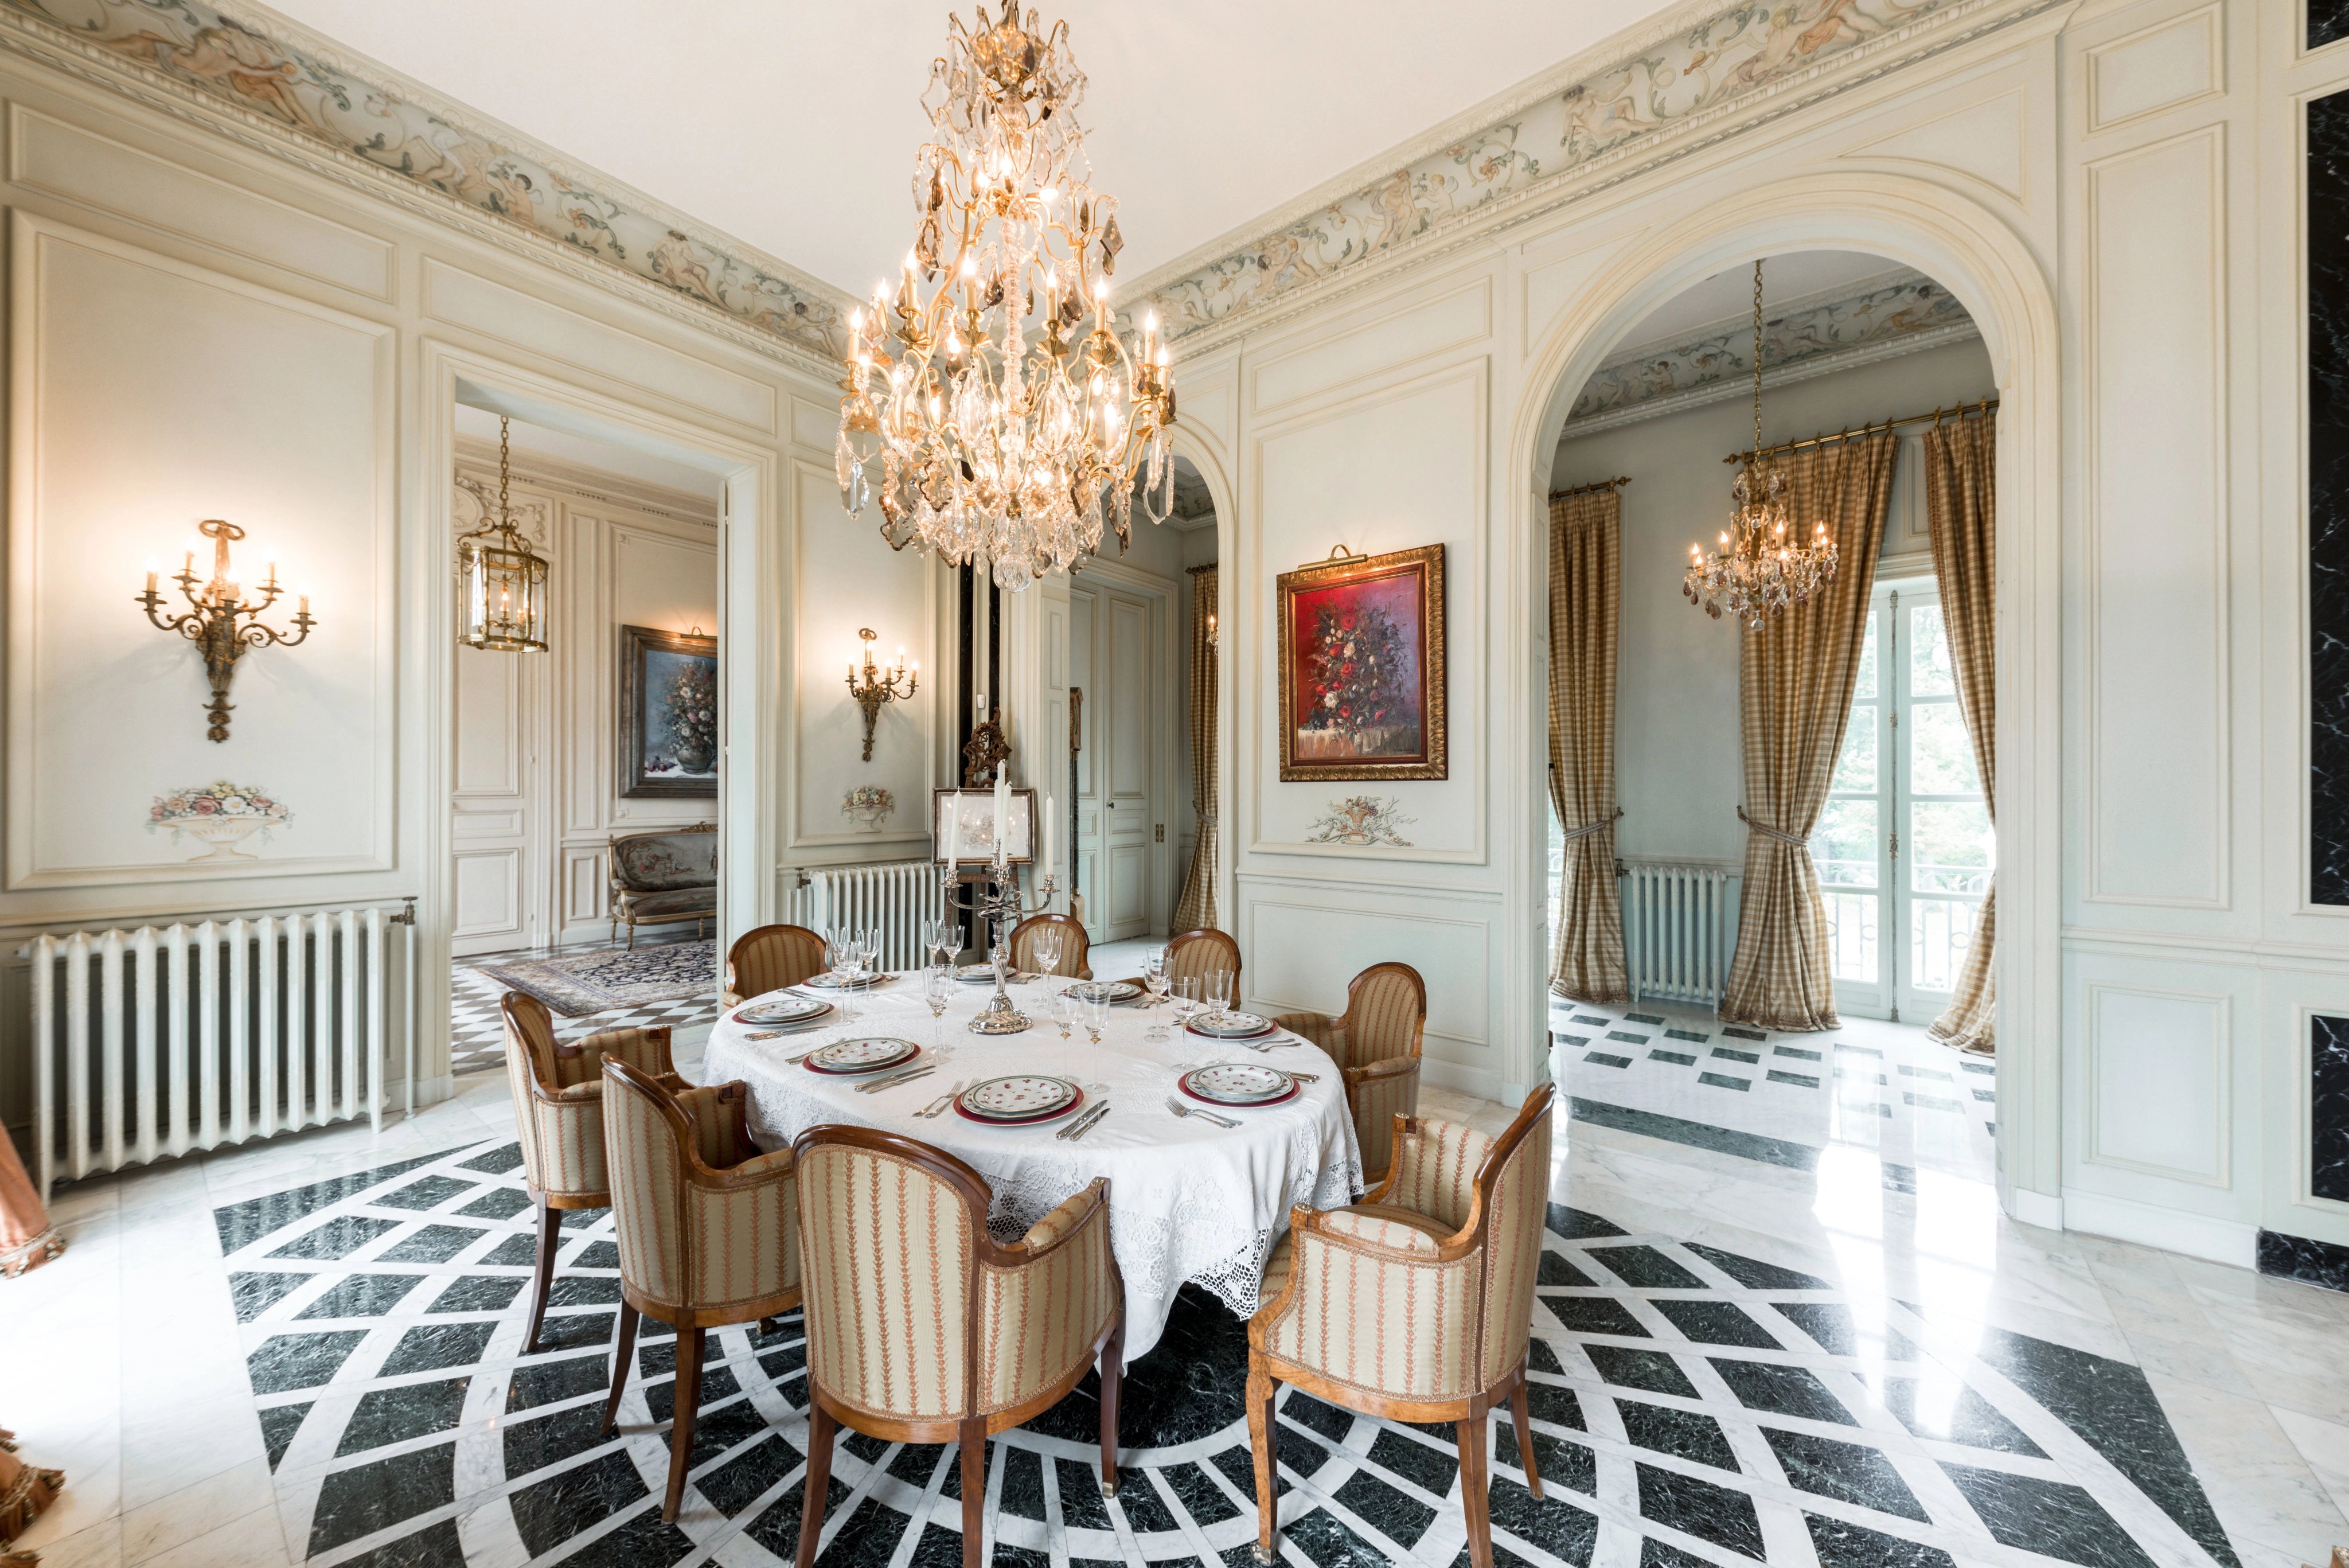 A sublime Palais inspired by Grand Trianon Palace, 20 min from Paris_1589